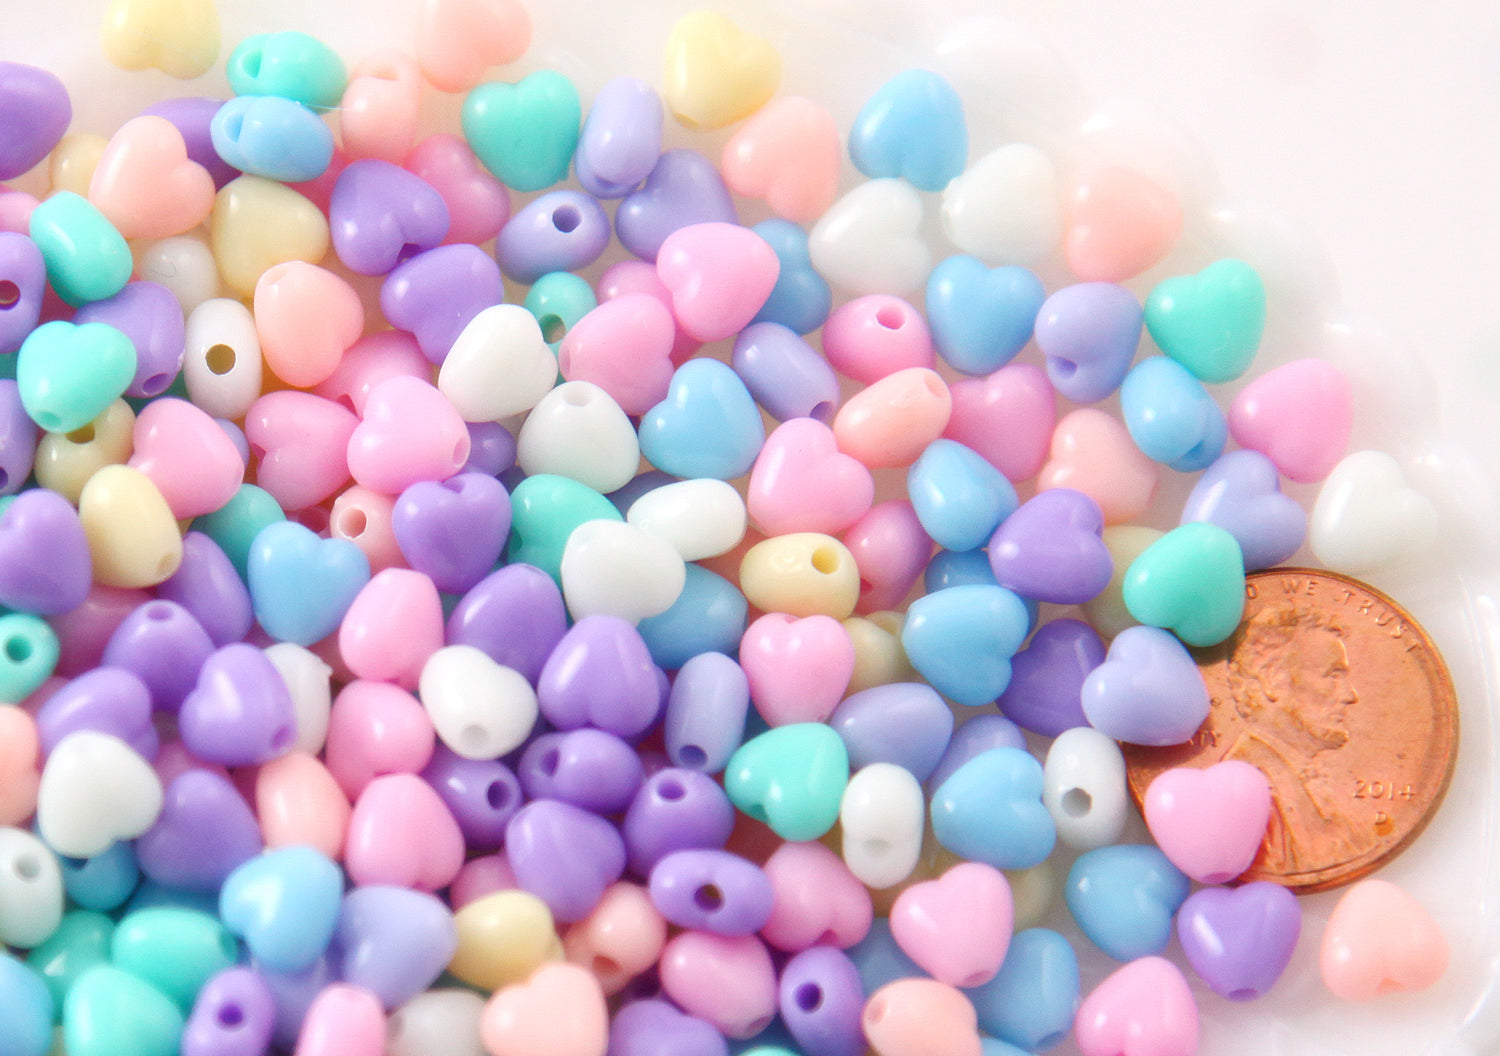 Pastel Heart Beads - 7mm Super Tiny Plastic Pastel Heart Resin or